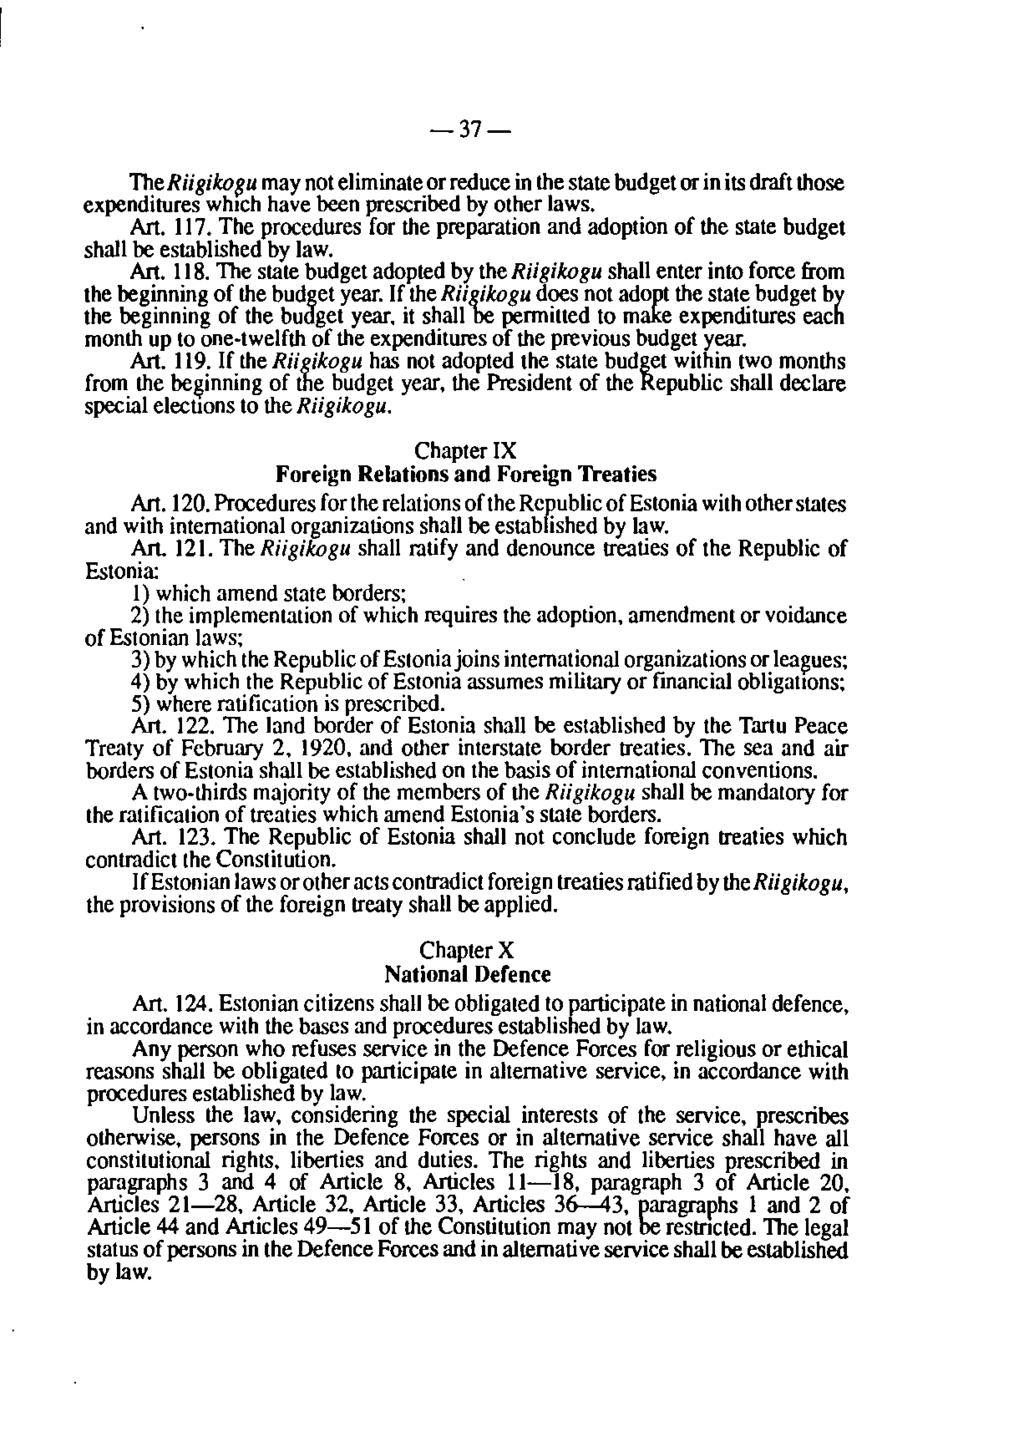 -37- TheRiigiko$u may not eliminate or reduce in the state budget or in its draft those expenditures which have been prescribed by other laws. Art. 117.